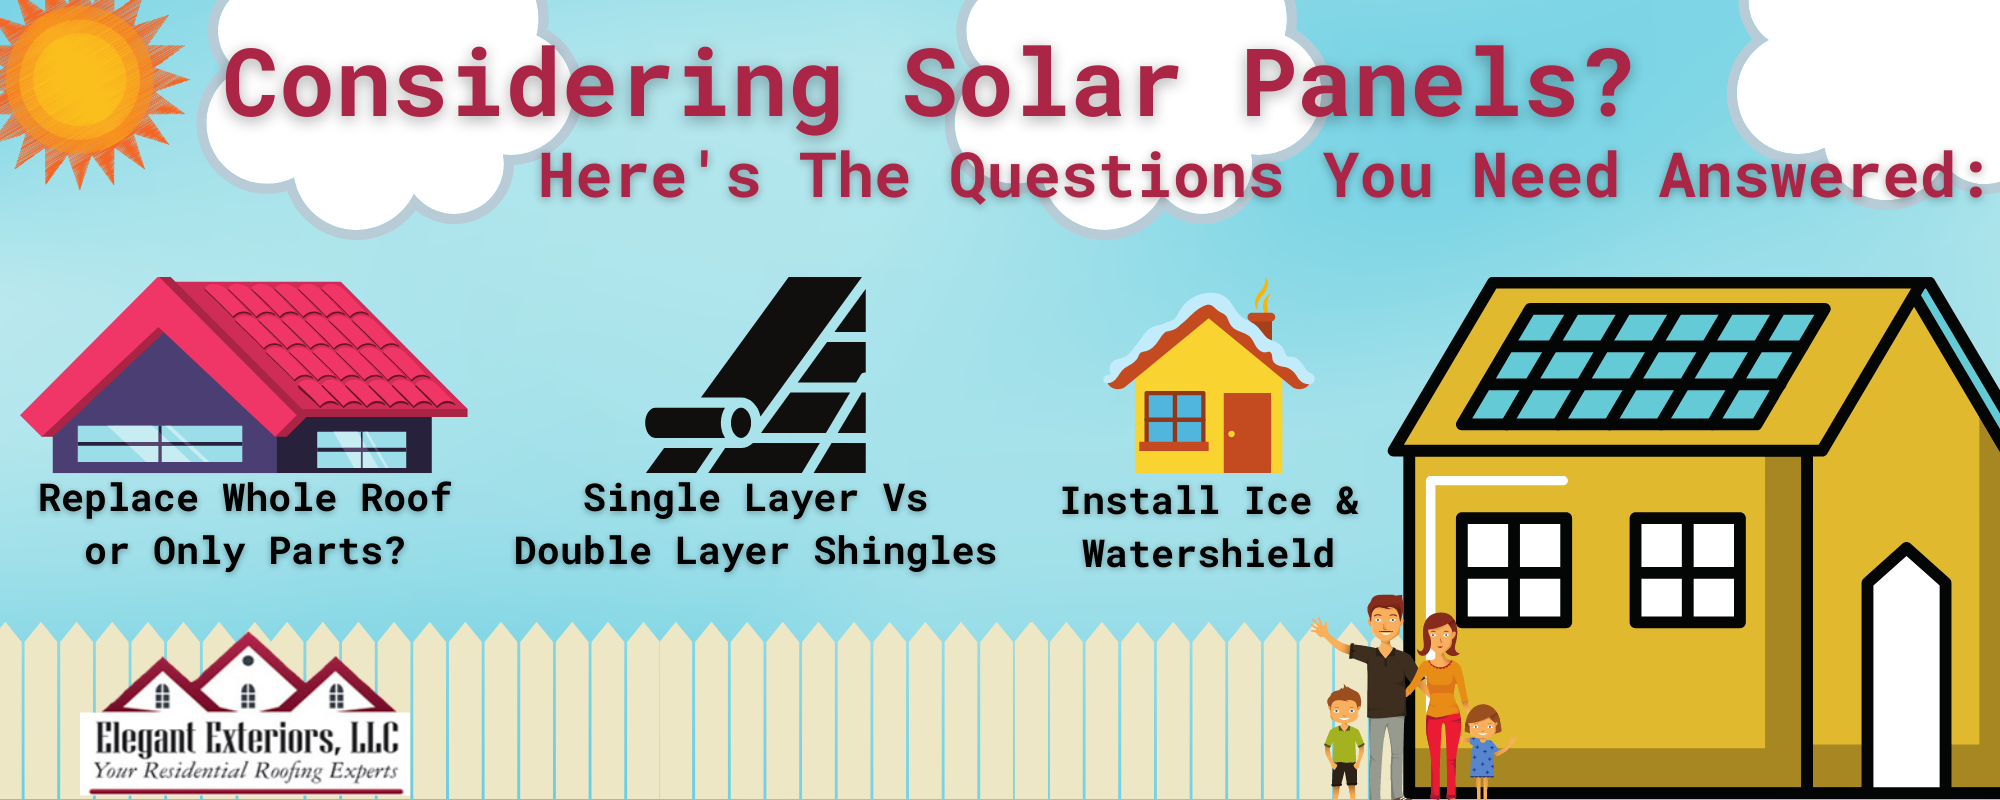 Infographic showing what to consider if you are considering solar panels for your roof.